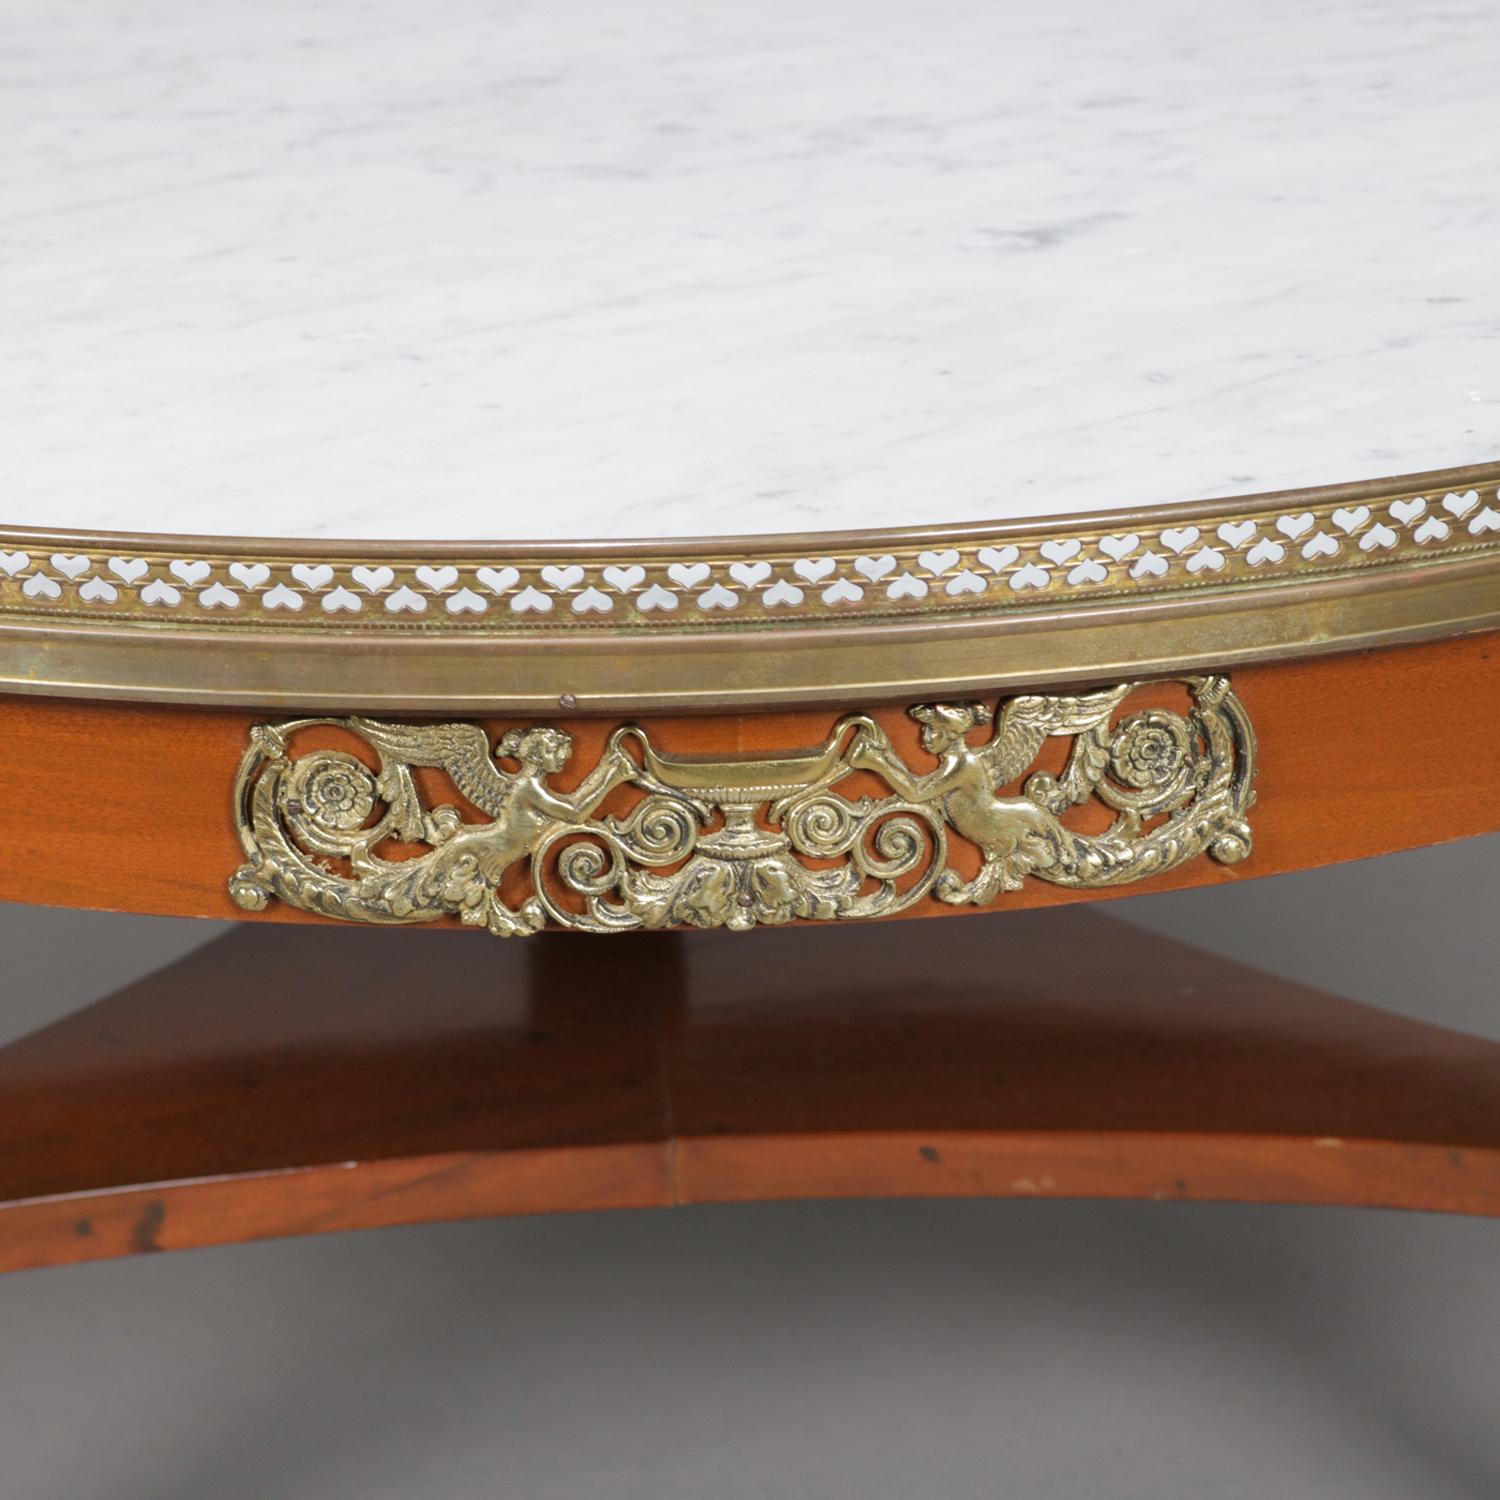 French neoclassical cocktail low table features round inset marble top seated in pierced ormolu gallery above skirt with pierced chimera and urn form ormolu mounts, raised on tripod base with lower triangular display with legs terminating in cast